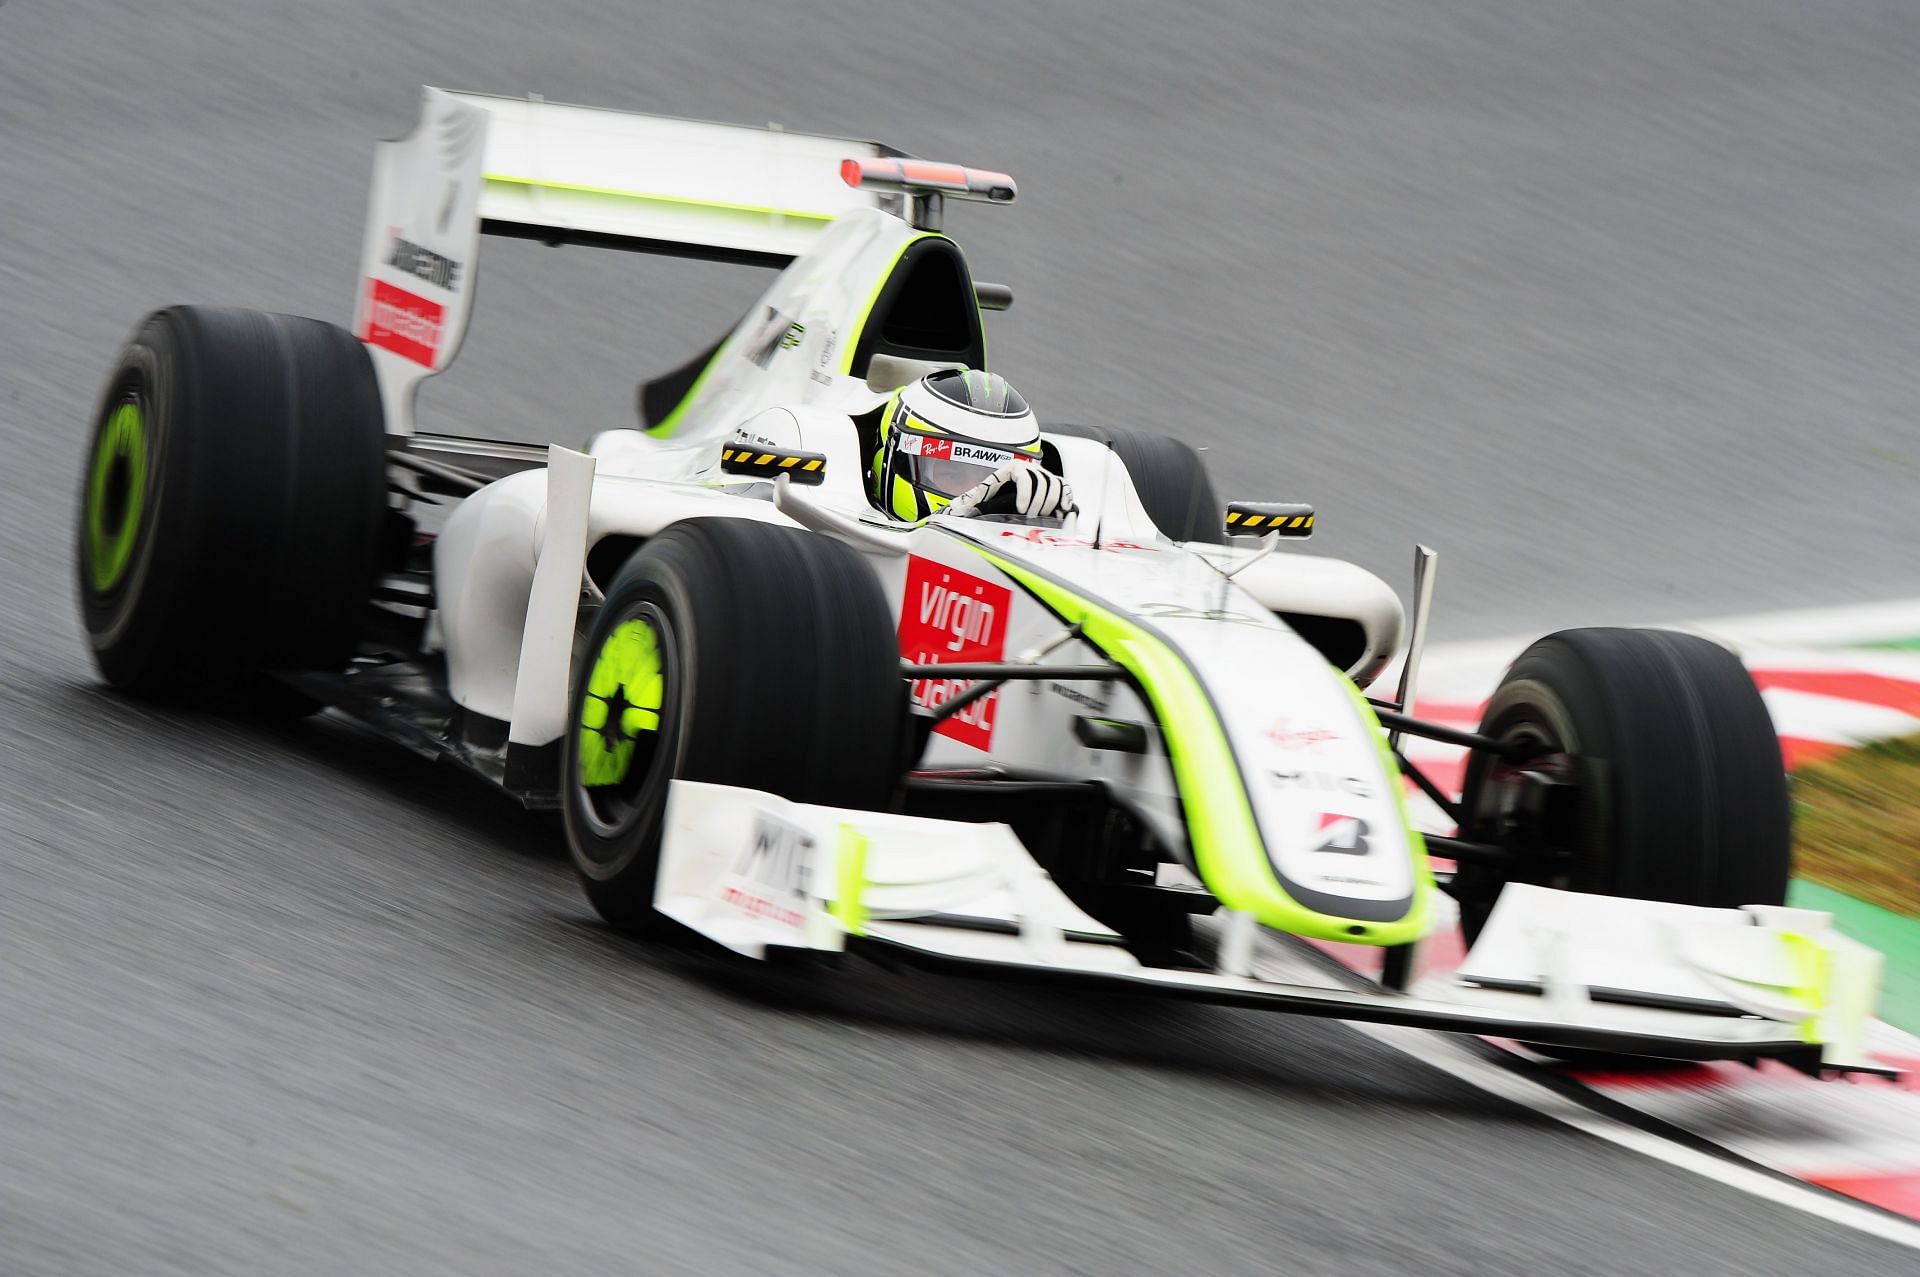 Brawn GP stole a march on everyone by gaining a massive headstart over the rest of the grid in 2009.